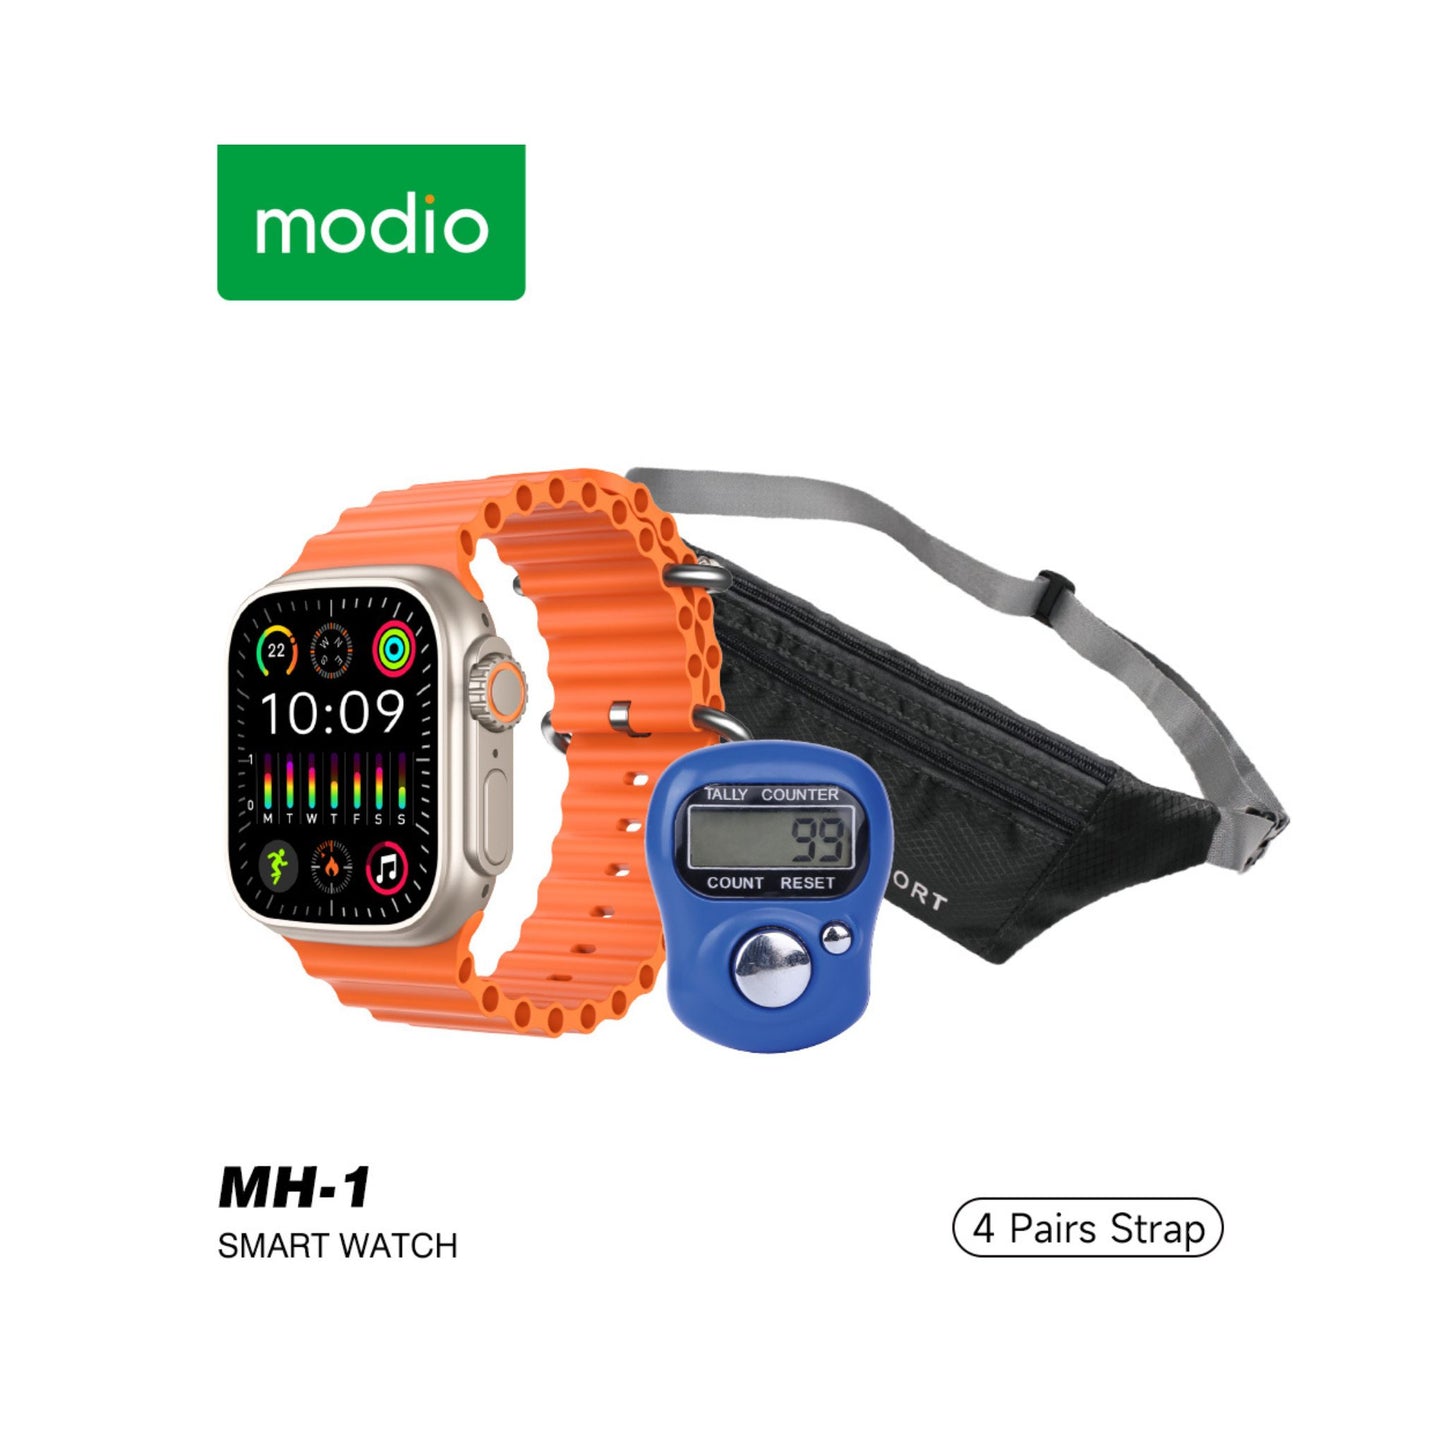 Premium Modio Wireless Charging Smartwatch MH-1 2.2 Inch/4 Pair Strap Included_Black